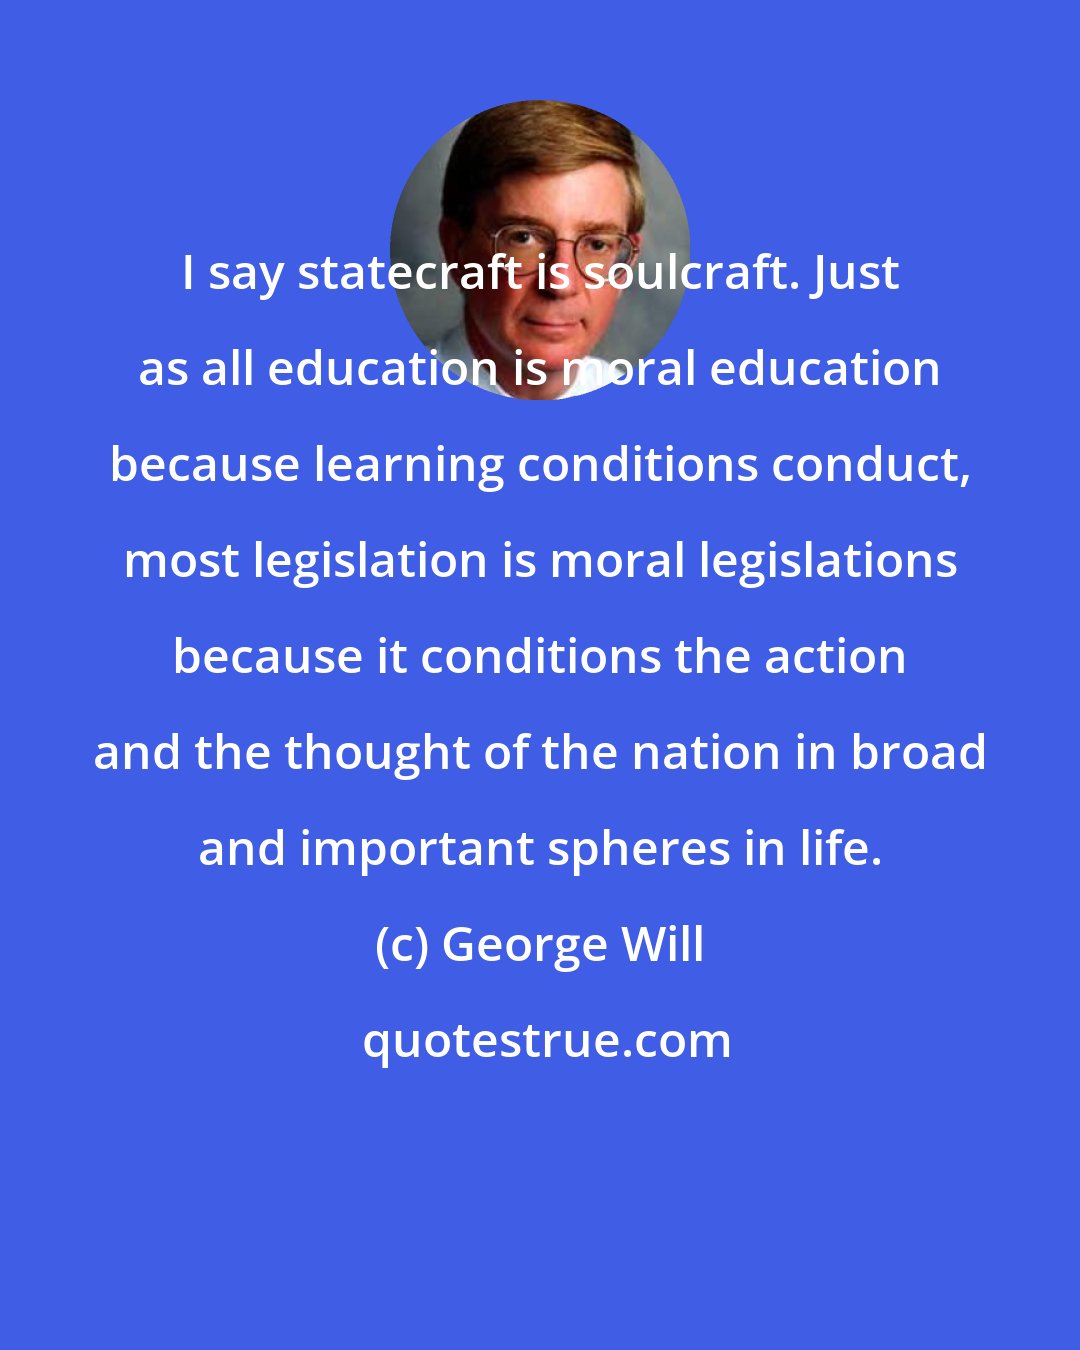 George Will: I say statecraft is soulcraft. Just as all education is moral education because learning conditions conduct, most legislation is moral legislations because it conditions the action and the thought of the nation in broad and important spheres in life.